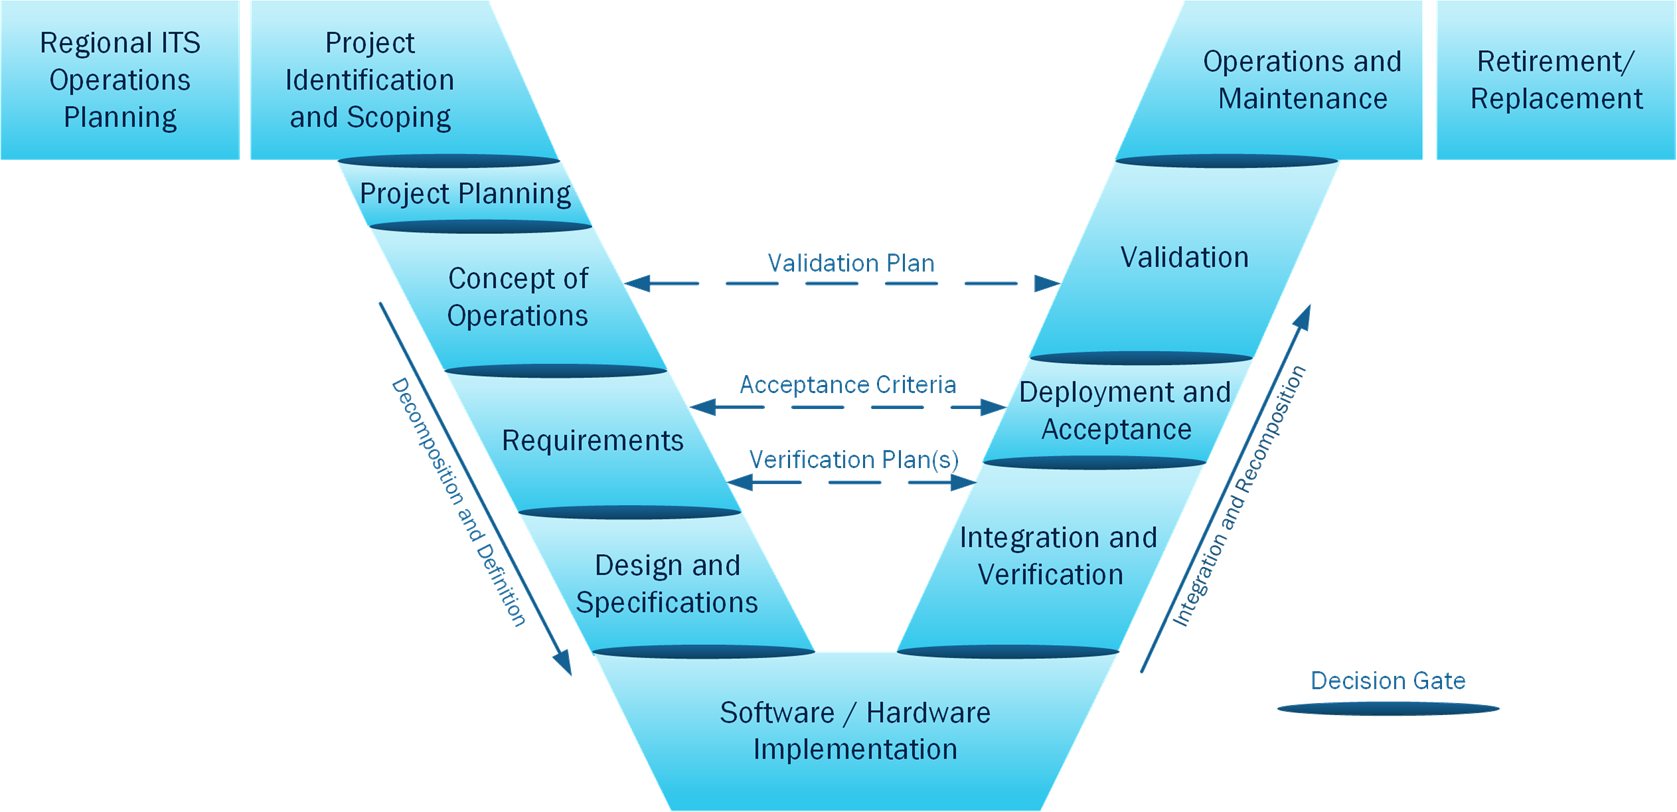 This diagram shows the complete VEE set of process steps from Regional ITS Operations Planning to Retirement/ Replacement.  The steps are described in the paragraphs below the figure.